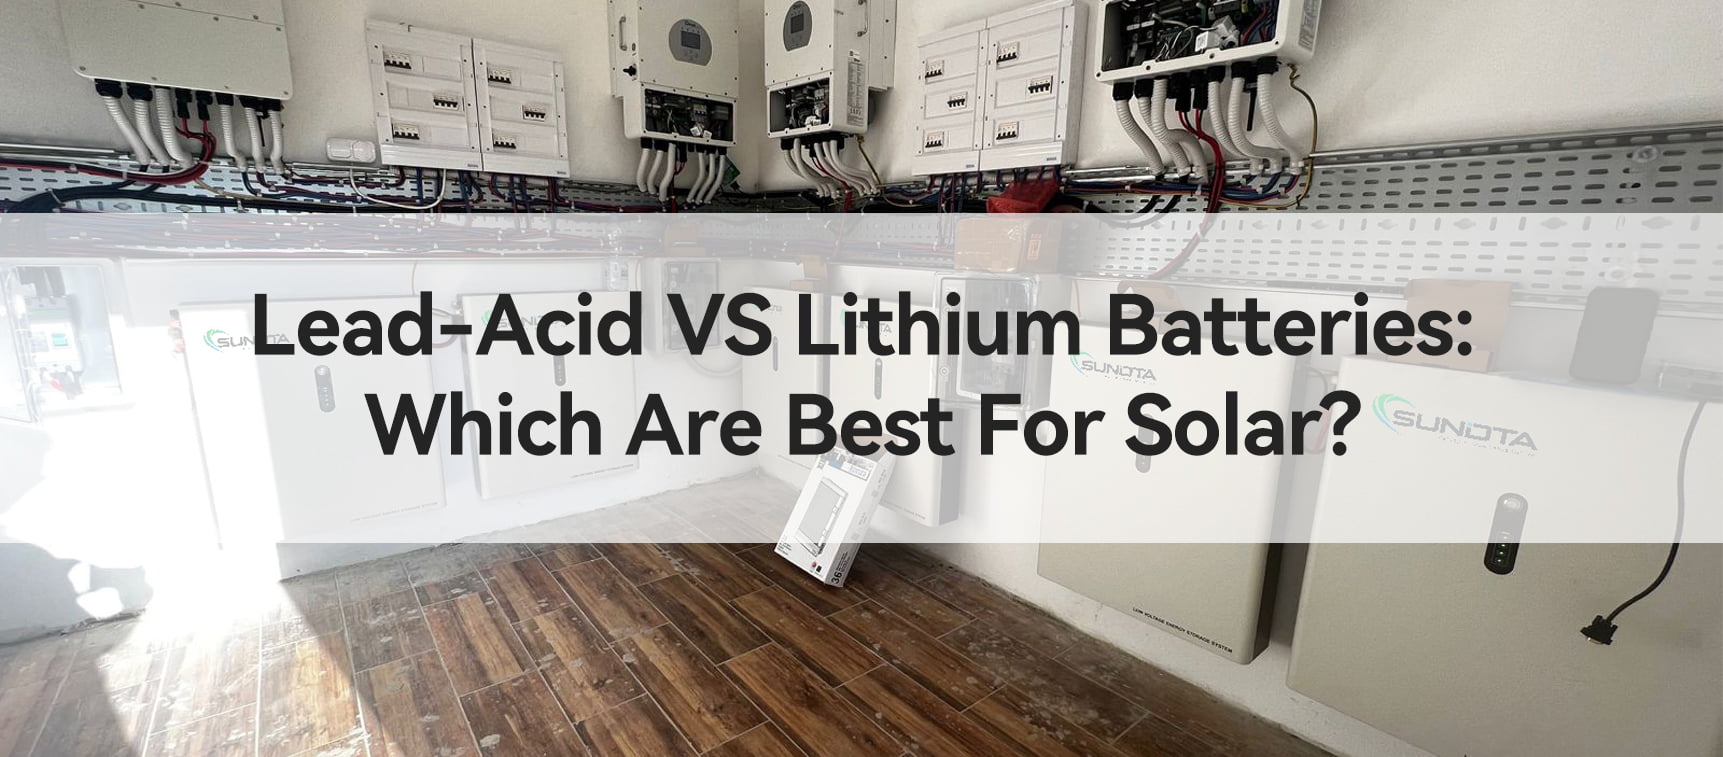 Lead-Acid VS Lithium Batteries: Which Are Best For Solar?